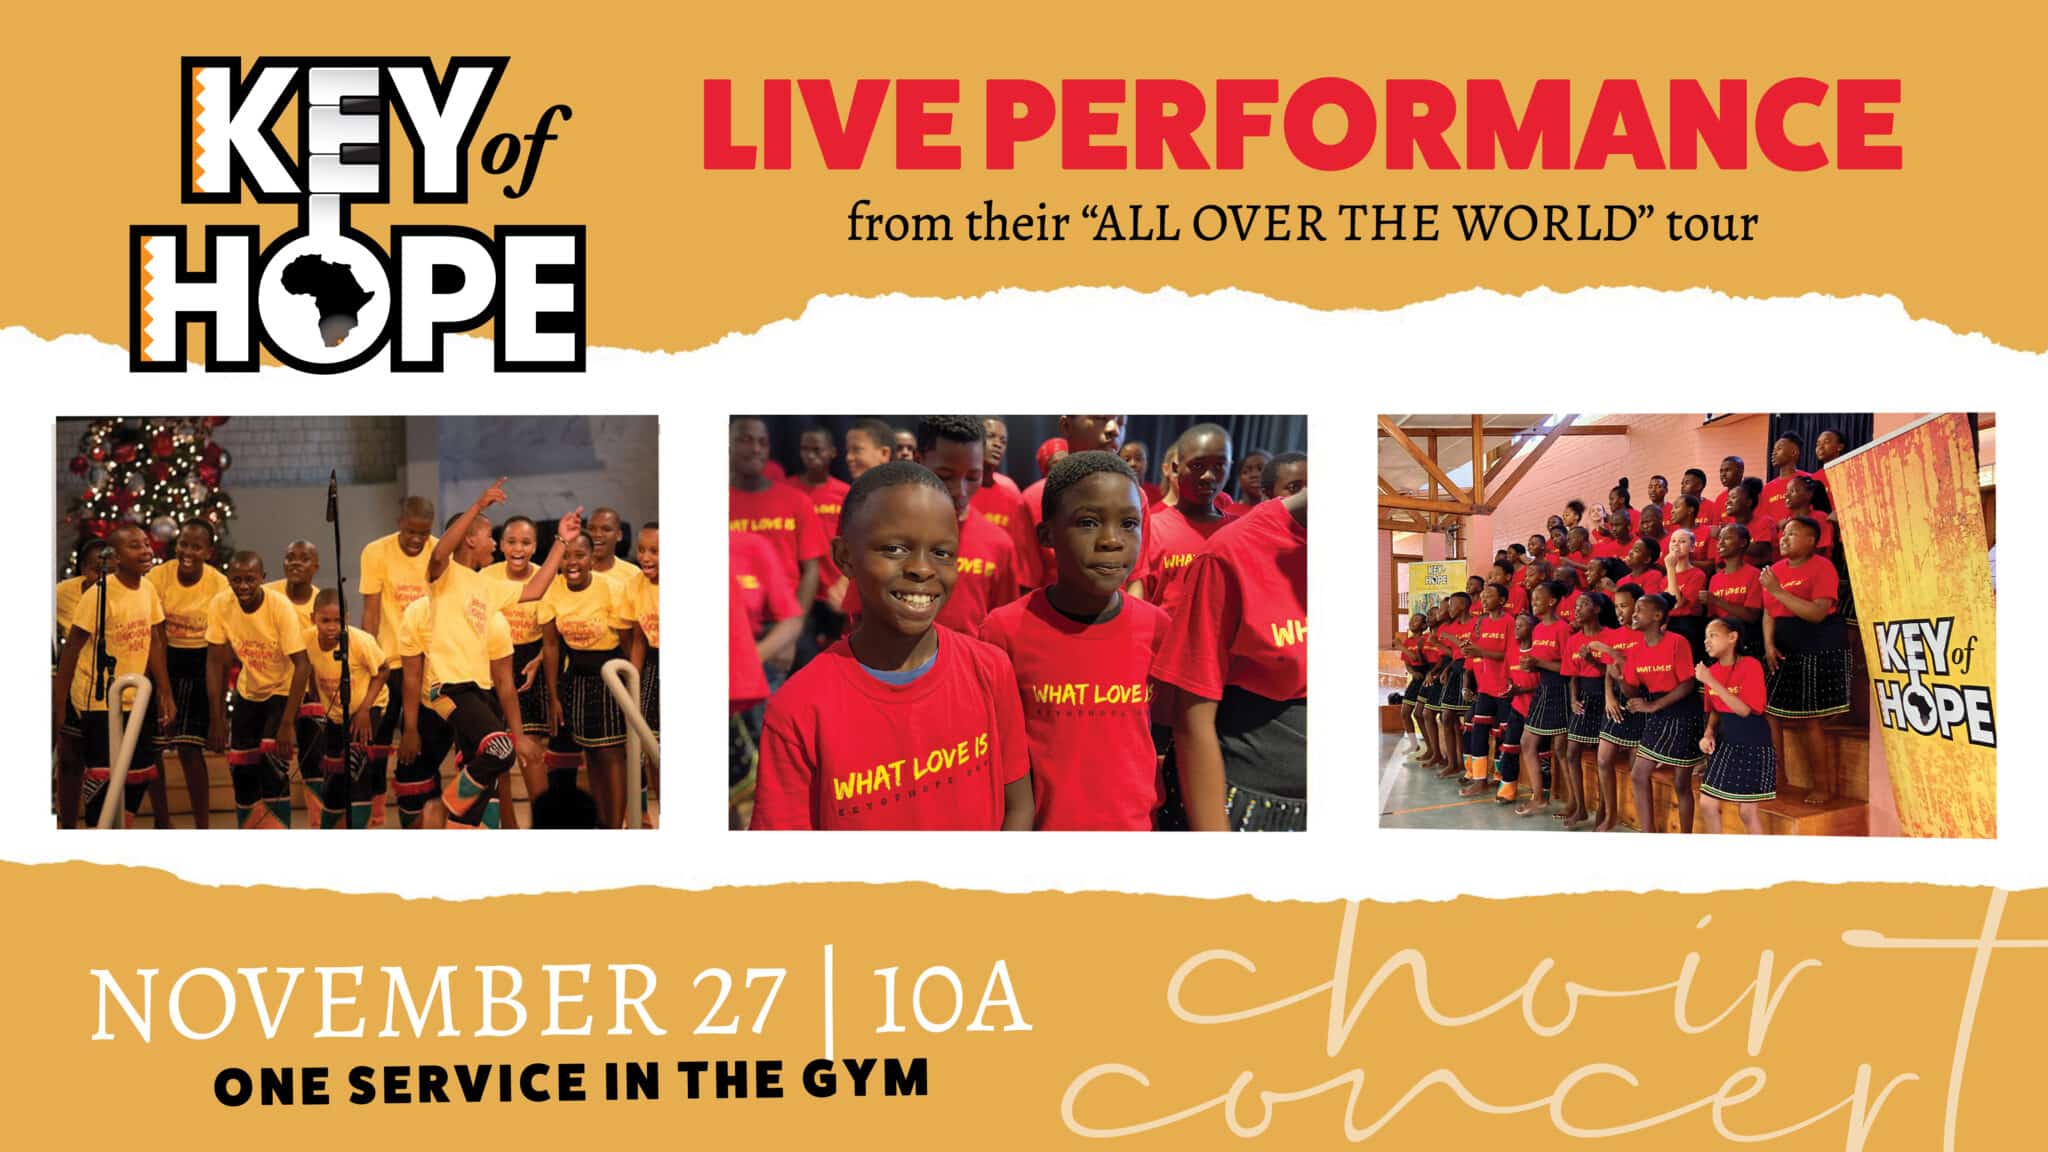 kids from key of hope choir in africa